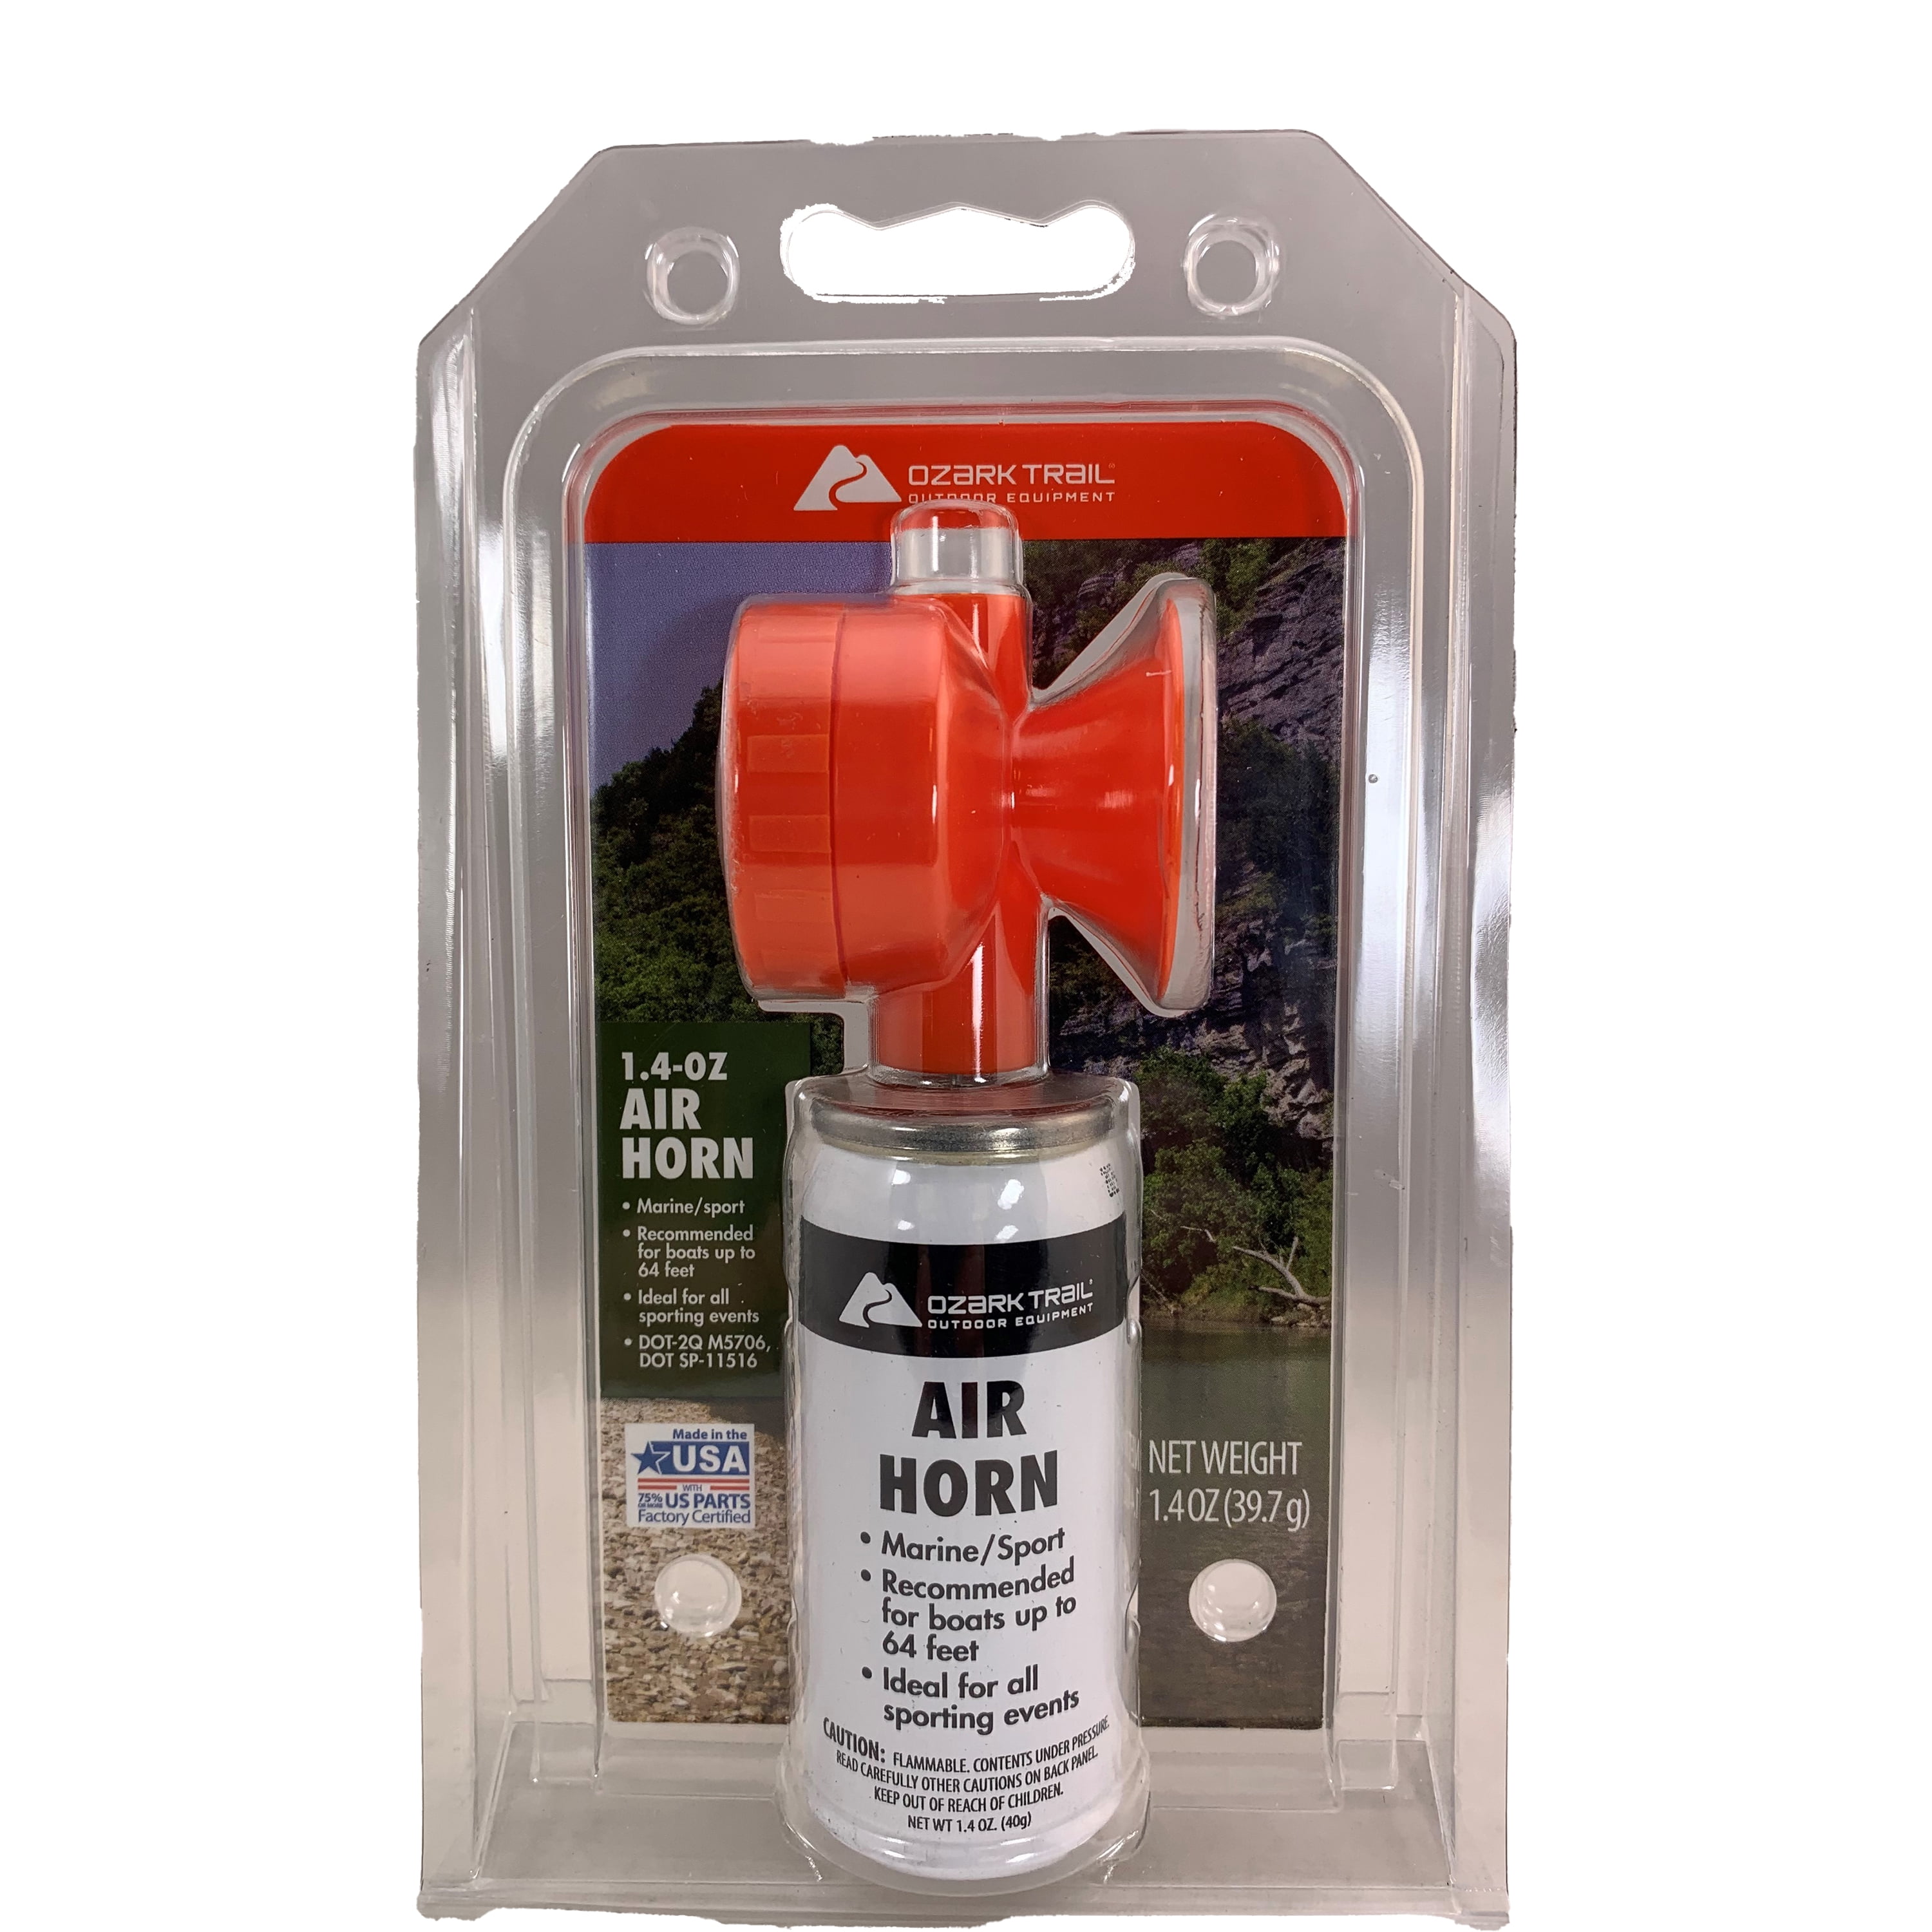 IN CASE OF FIRE USE THE AIR HORN SIGN & AIR HORN & BRACKET FIRE SAFETY DIY 